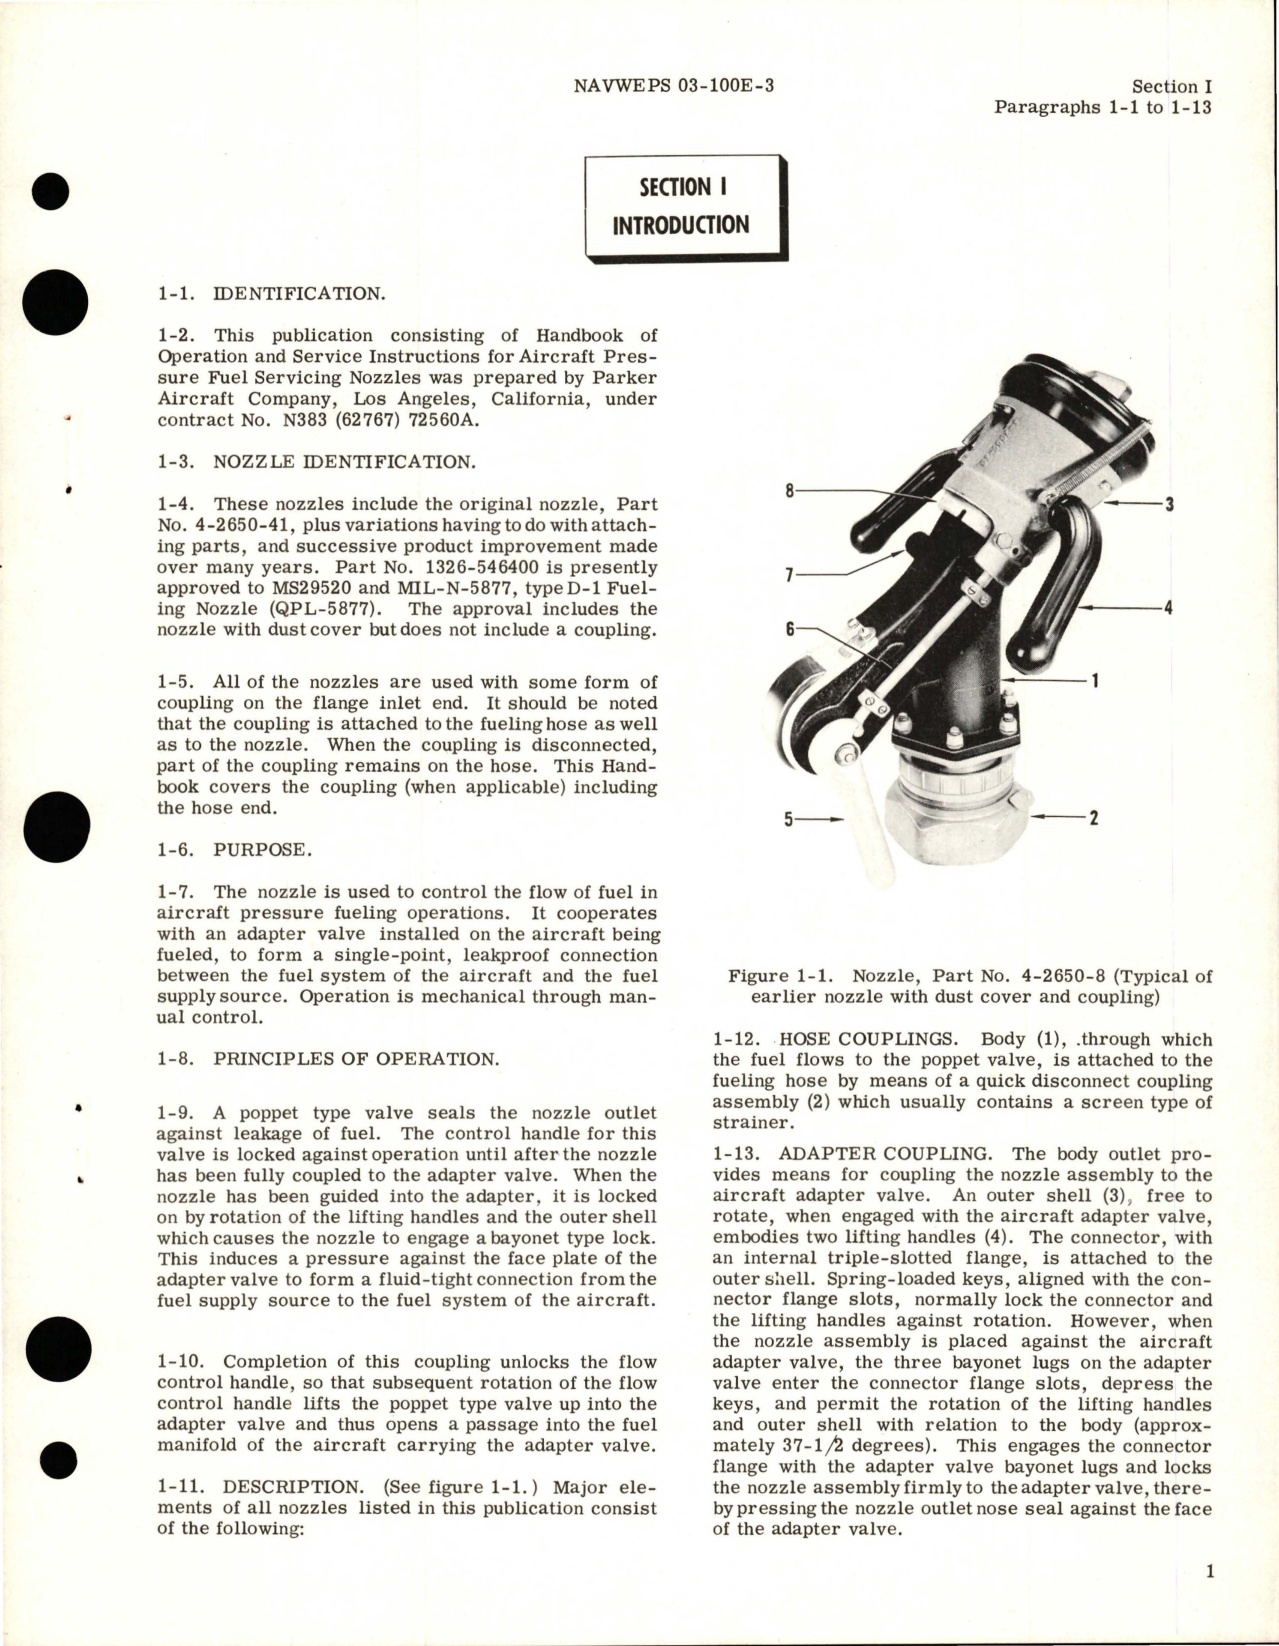 Sample page 5 from AirCorps Library document: Operation and Service Instructions for Pressure Fuel Servicing Nozzles